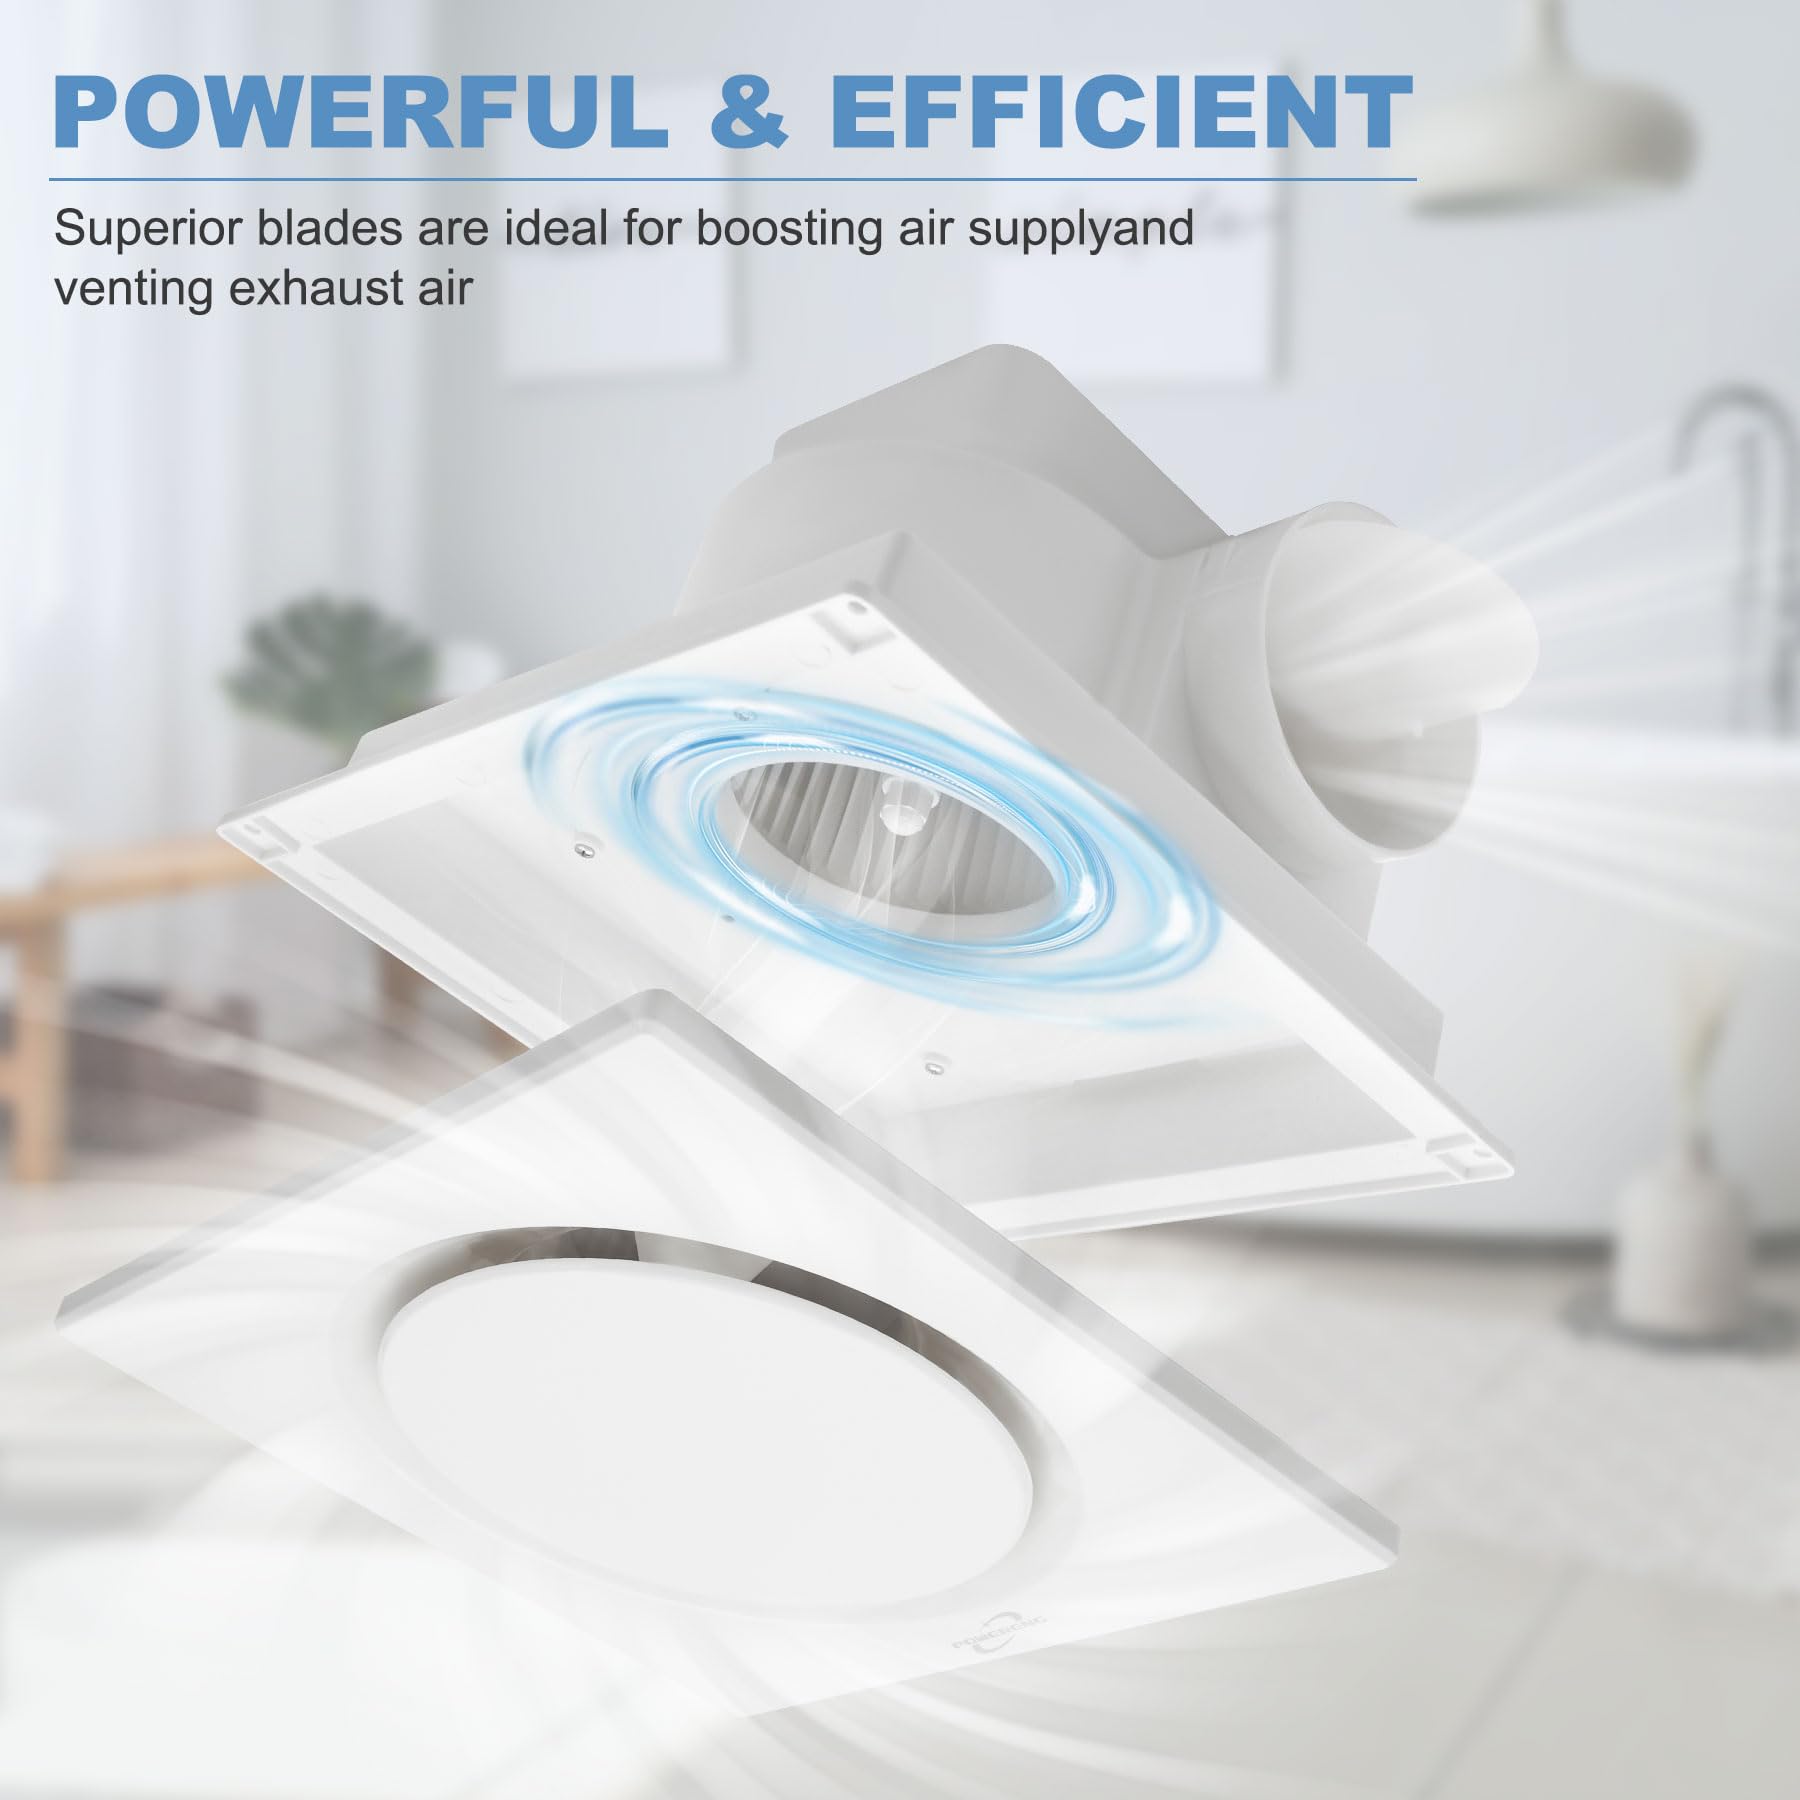 POWERENG Bathroom Fan Ultra-Quiet Bathroom Ventilation, Exhaust Fan,123CFM 0.7 Sones 40W,4 Inch Duct Collar,White,9 Inch Opening size,Easy to Install & Replace